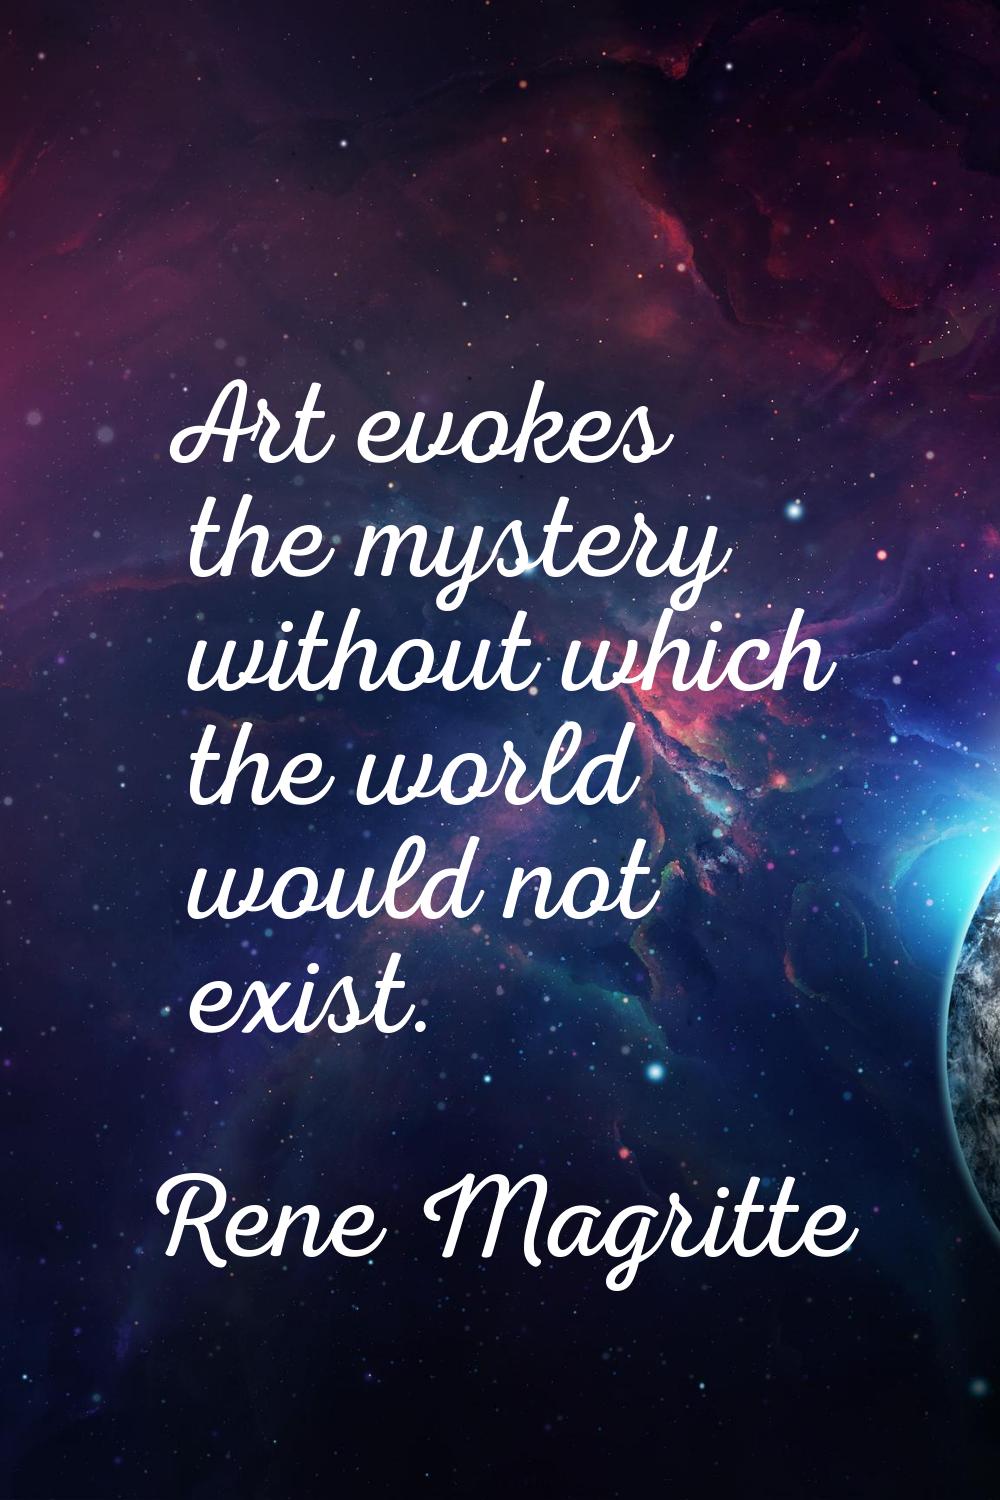 Art evokes the mystery without which the world would not exist.